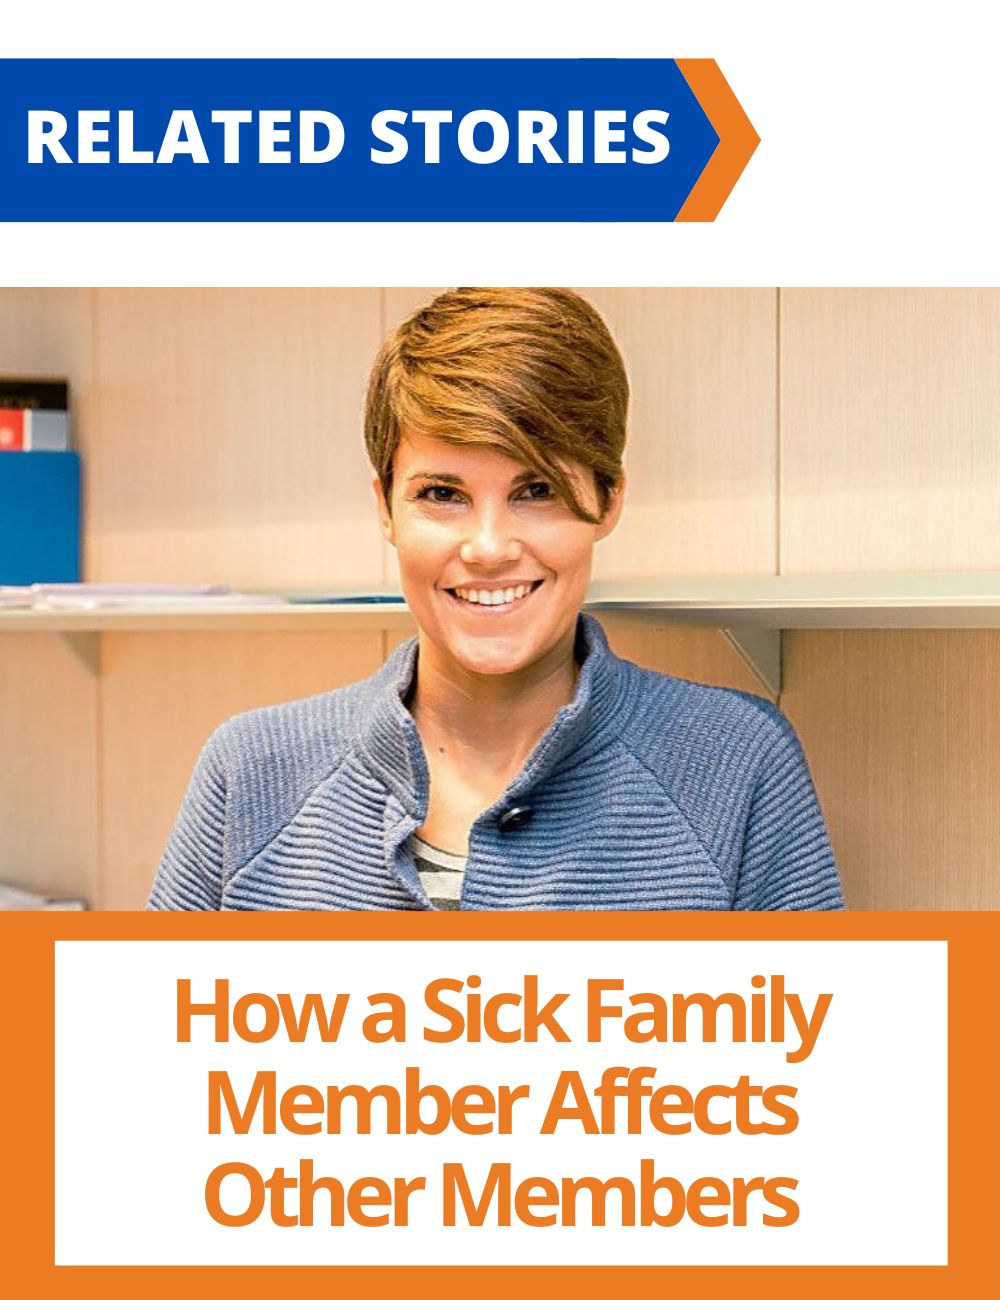 Link to related stories. Image: Professor Nicoletta Balbo. Story headline: How a Sick Family Member Affects Other Members' Education, Employment, and Health